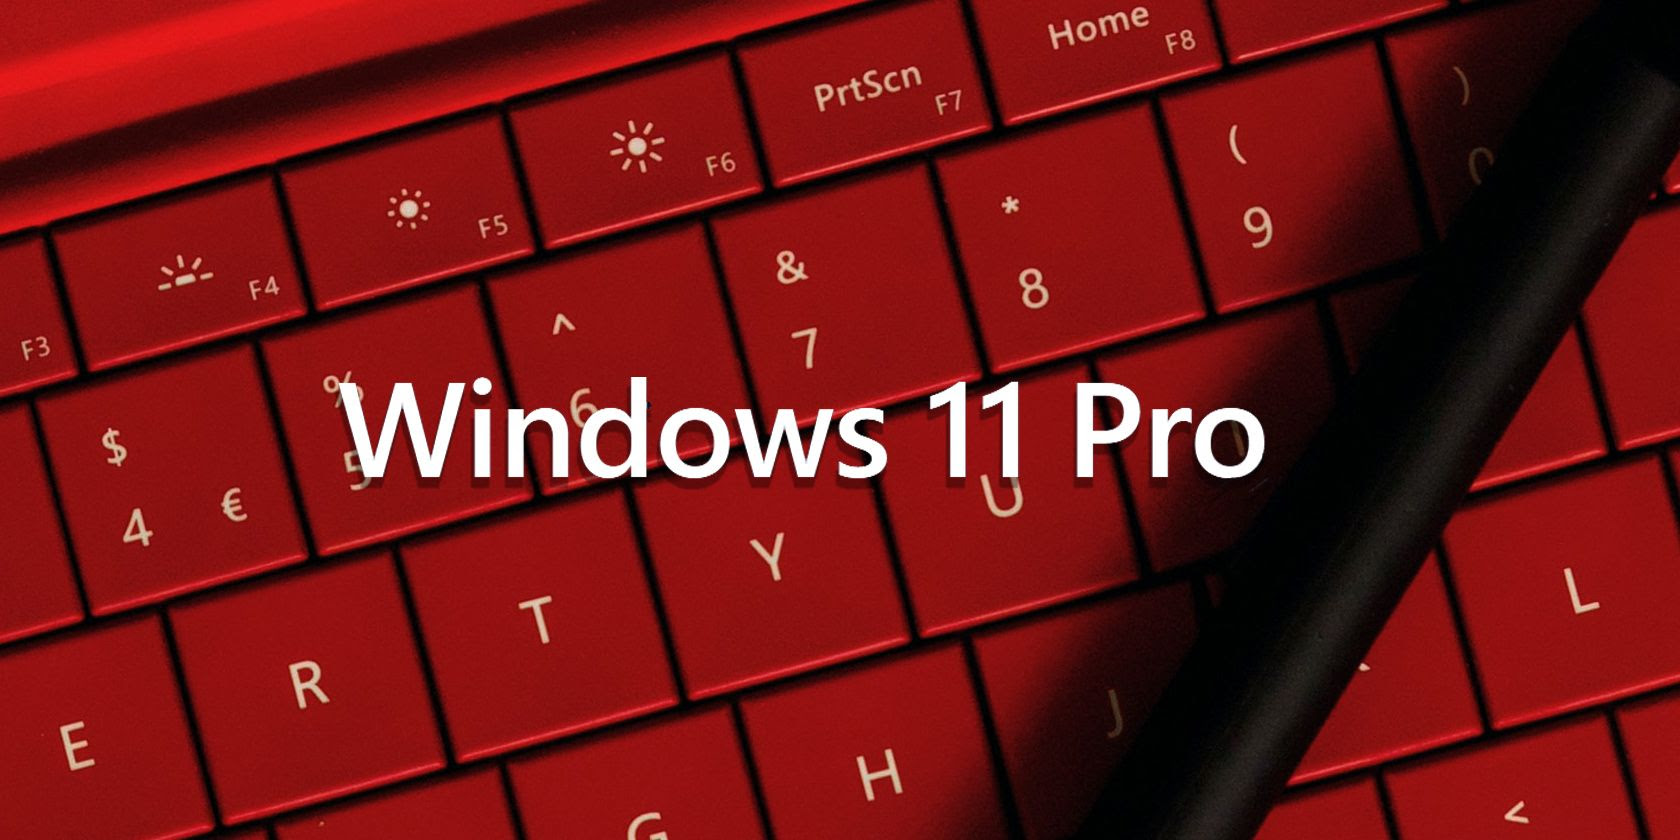 Who Is Windows 11 Pro Best For?